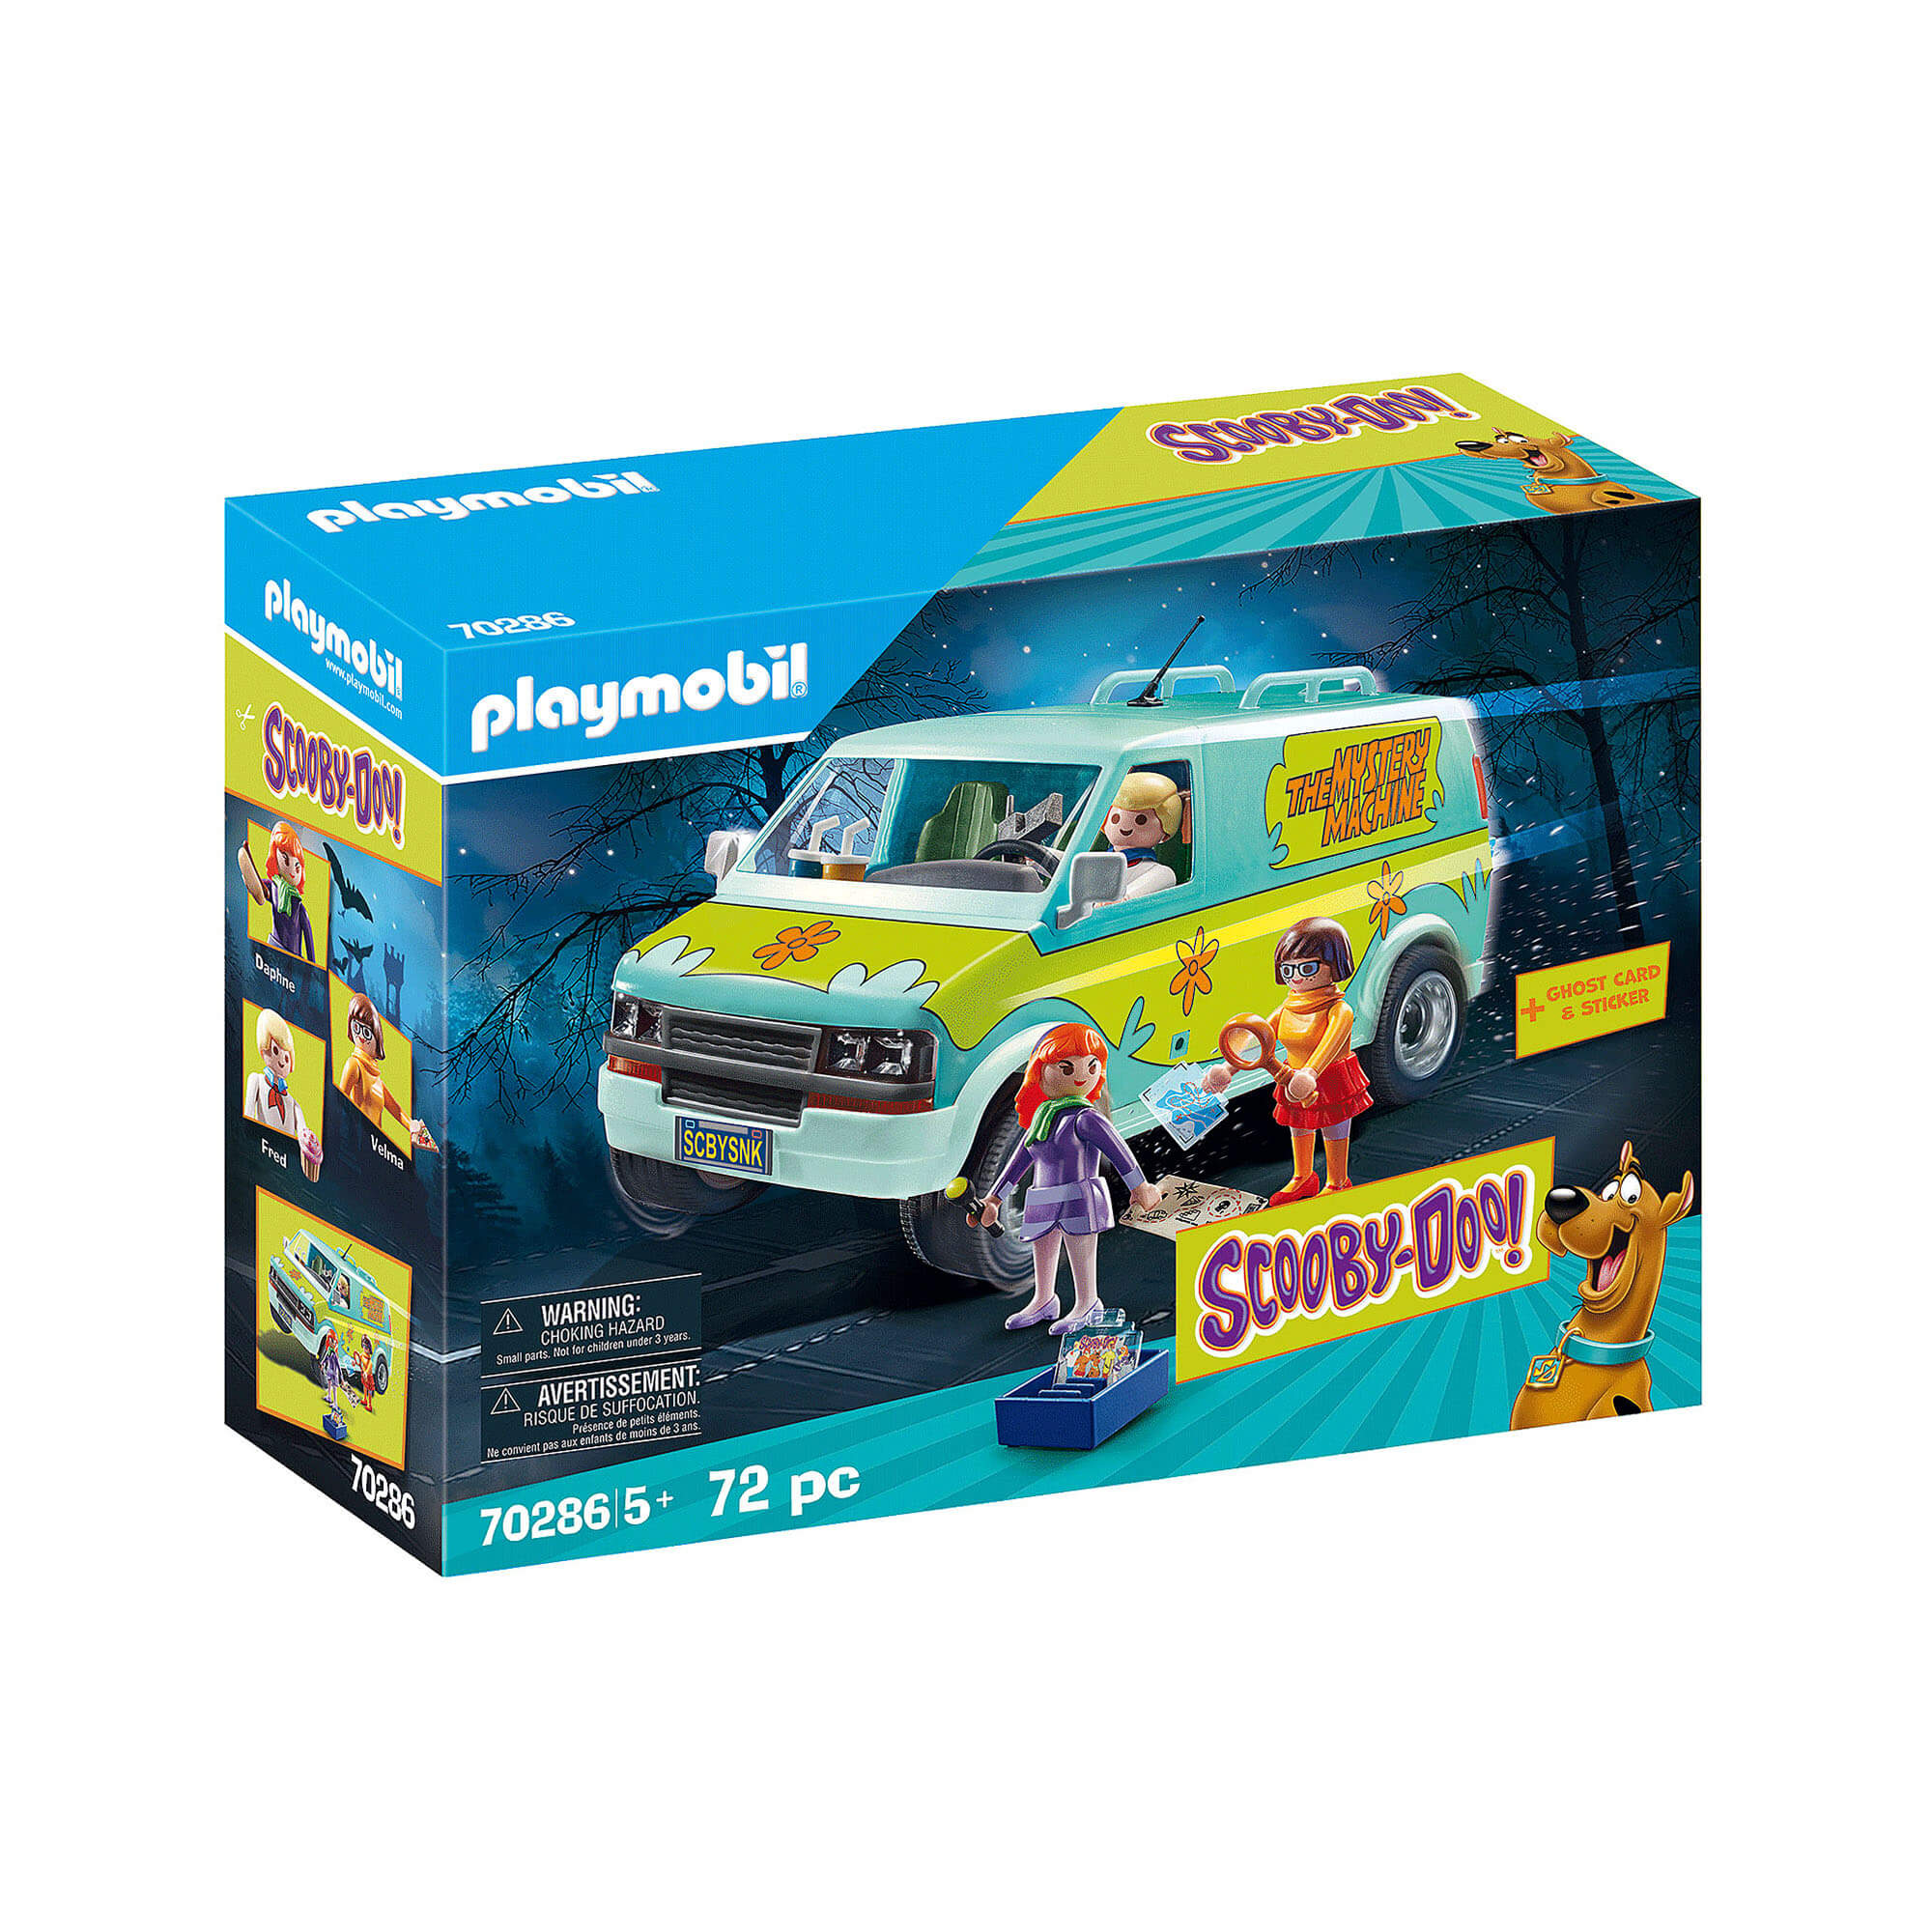 Playmobil Party Favors Set for Boys - Playmobil Mystery Pack Bundle with 6  Playmobil Blind Bags with Figurine Plus Stickers, More | Playmobil Toys